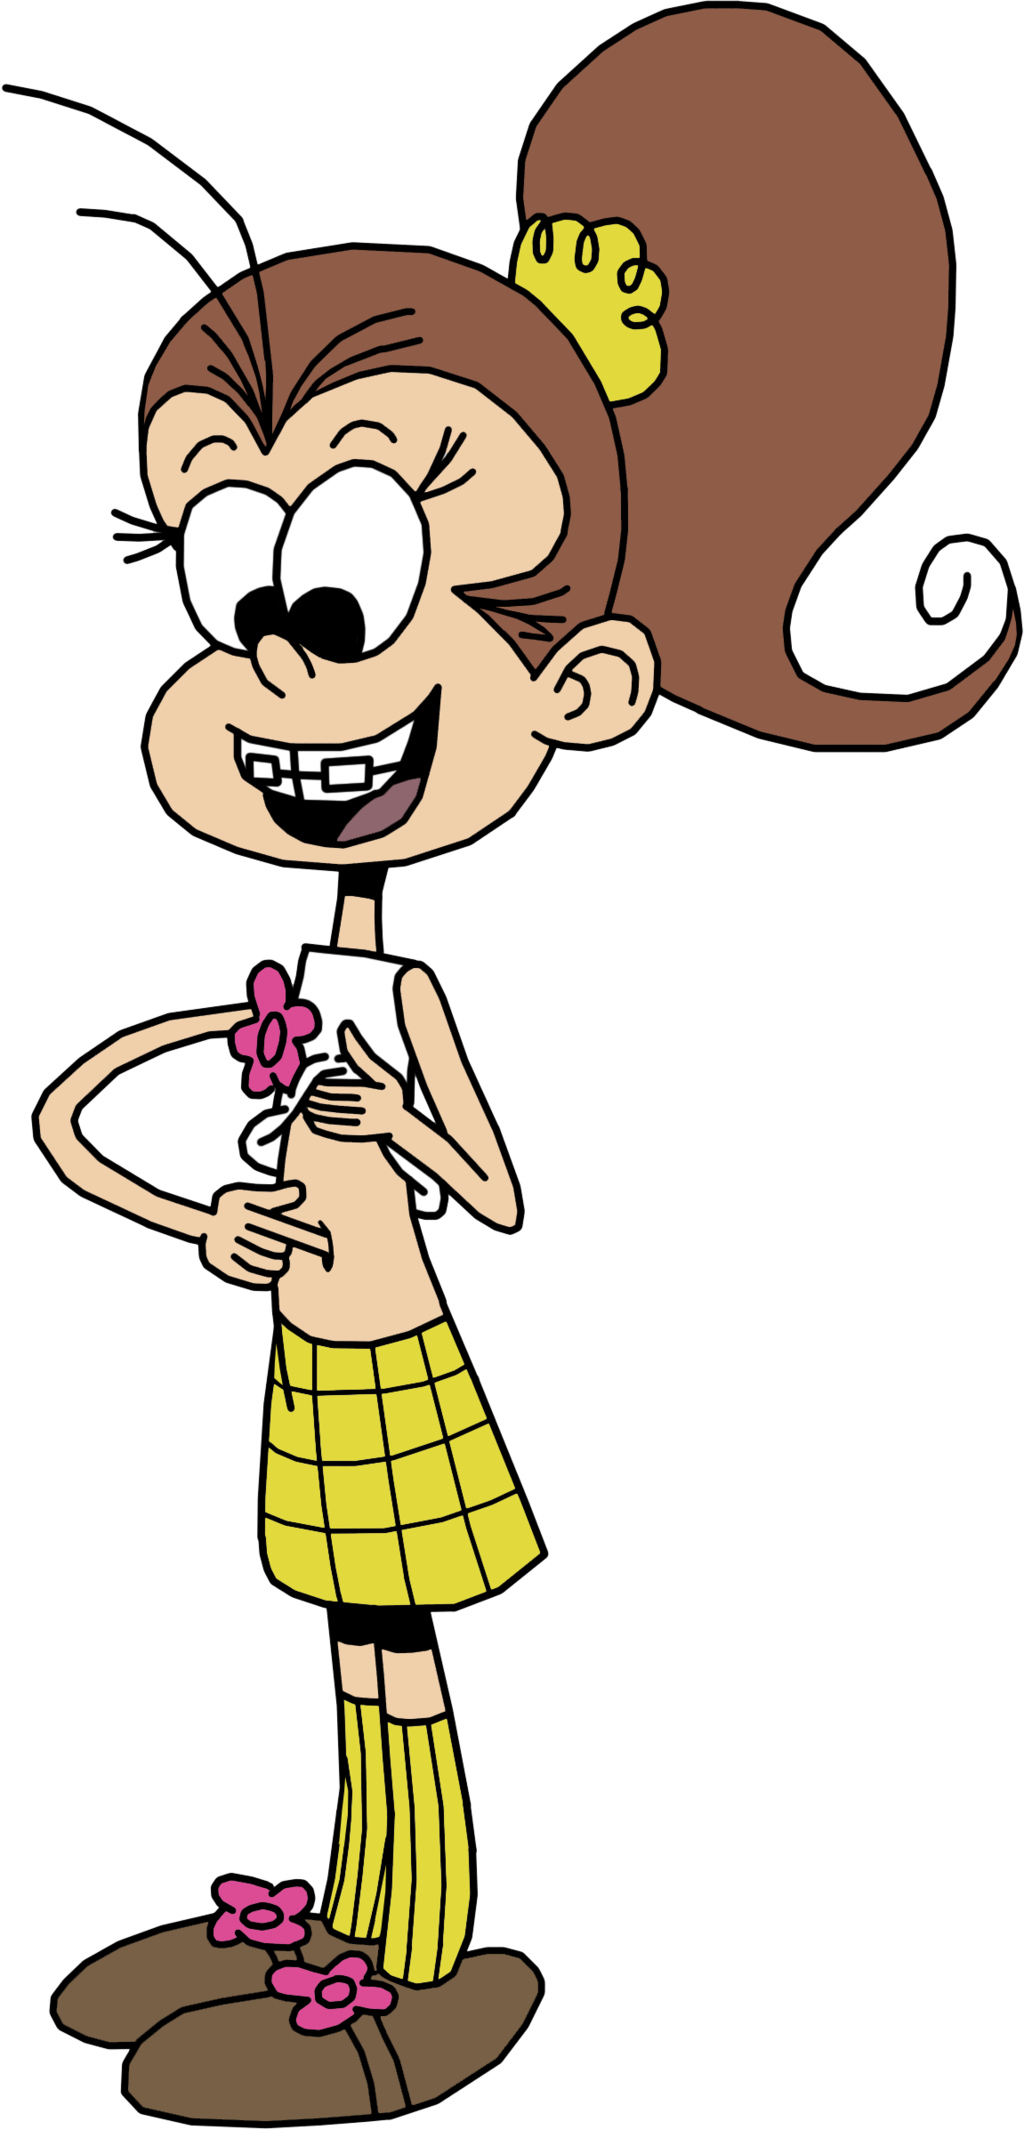 Download and share clipart about Loud House The Belly Related Keywords Sugg...